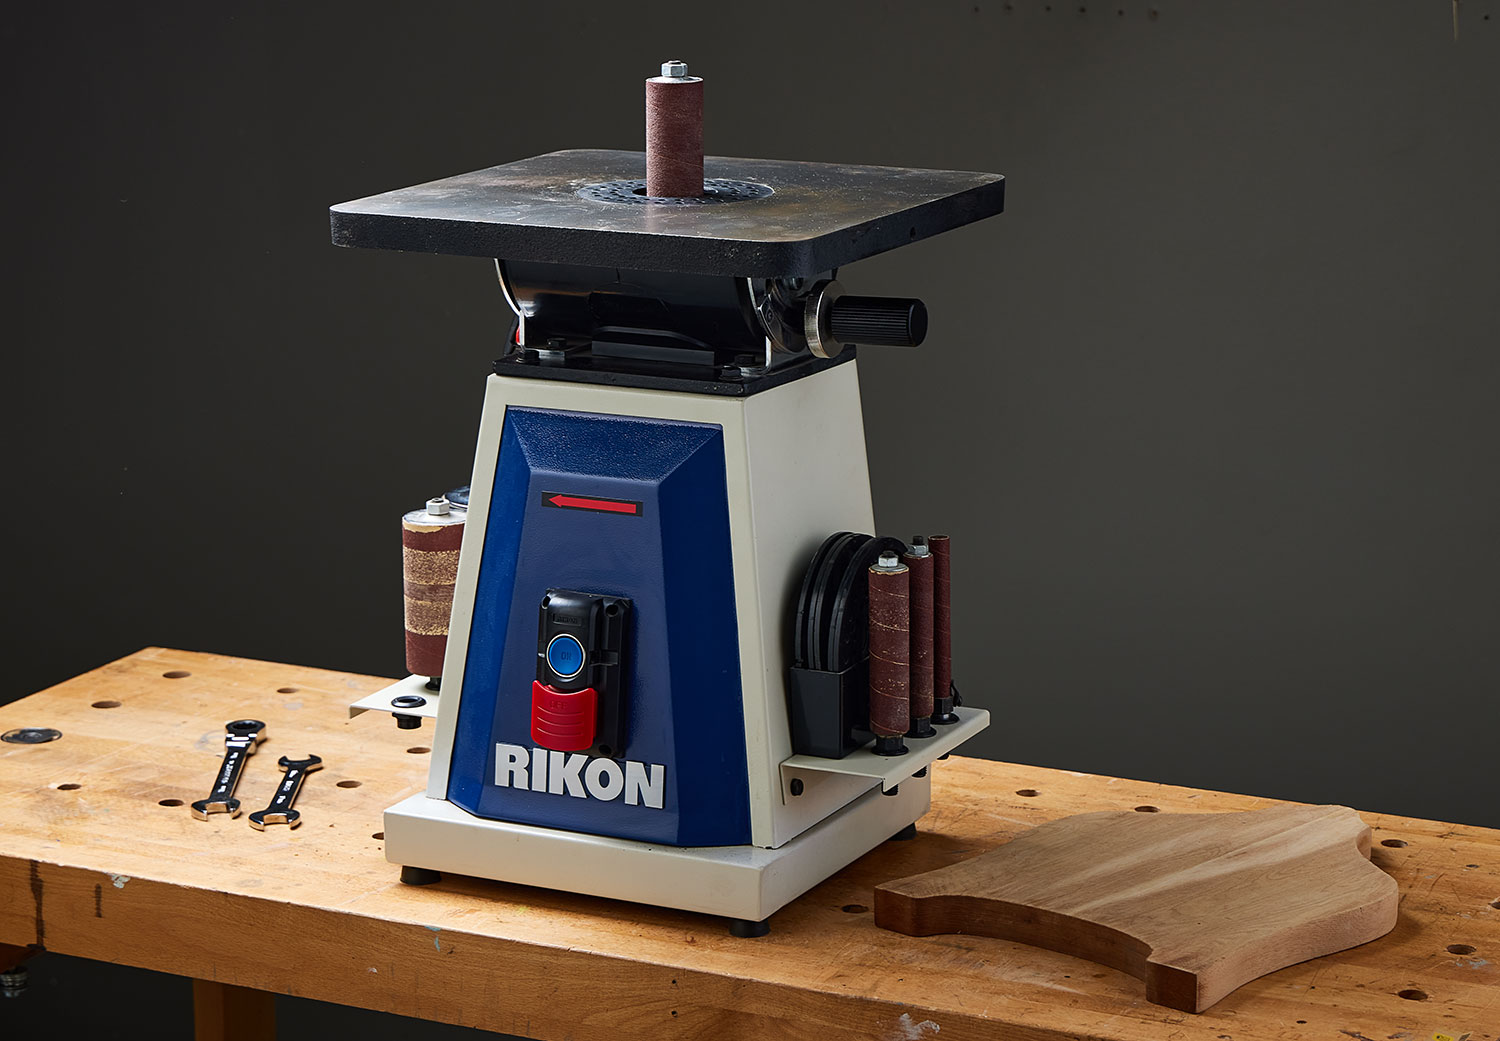 The Rikon oscillating spindle sander atop a workbench.